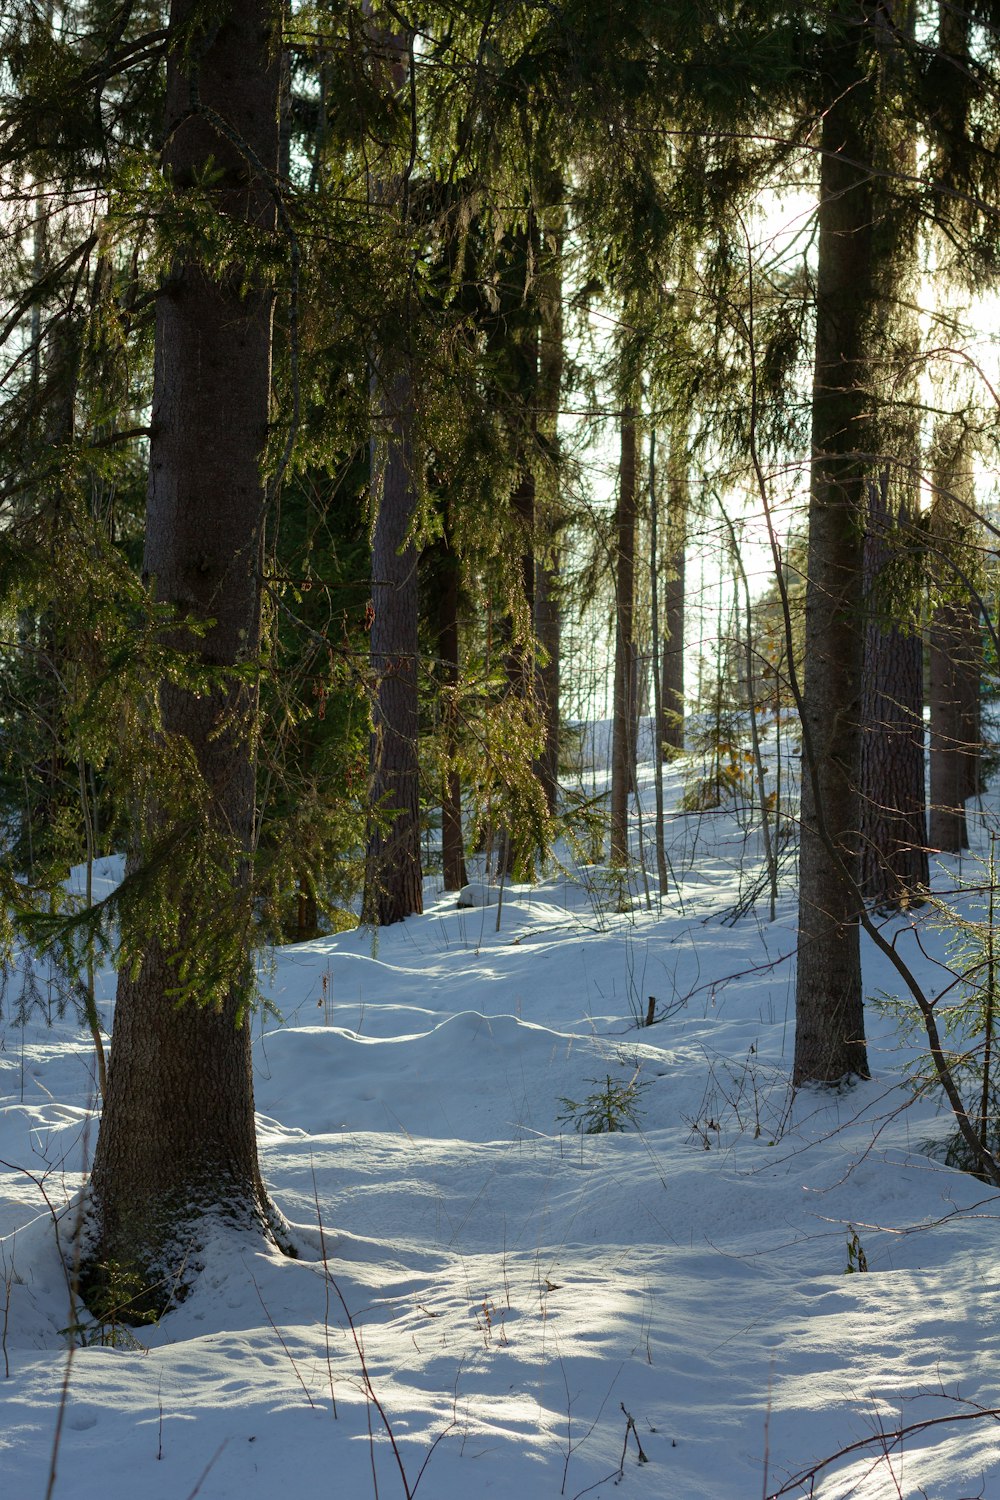 a person walking through the snow in the woods